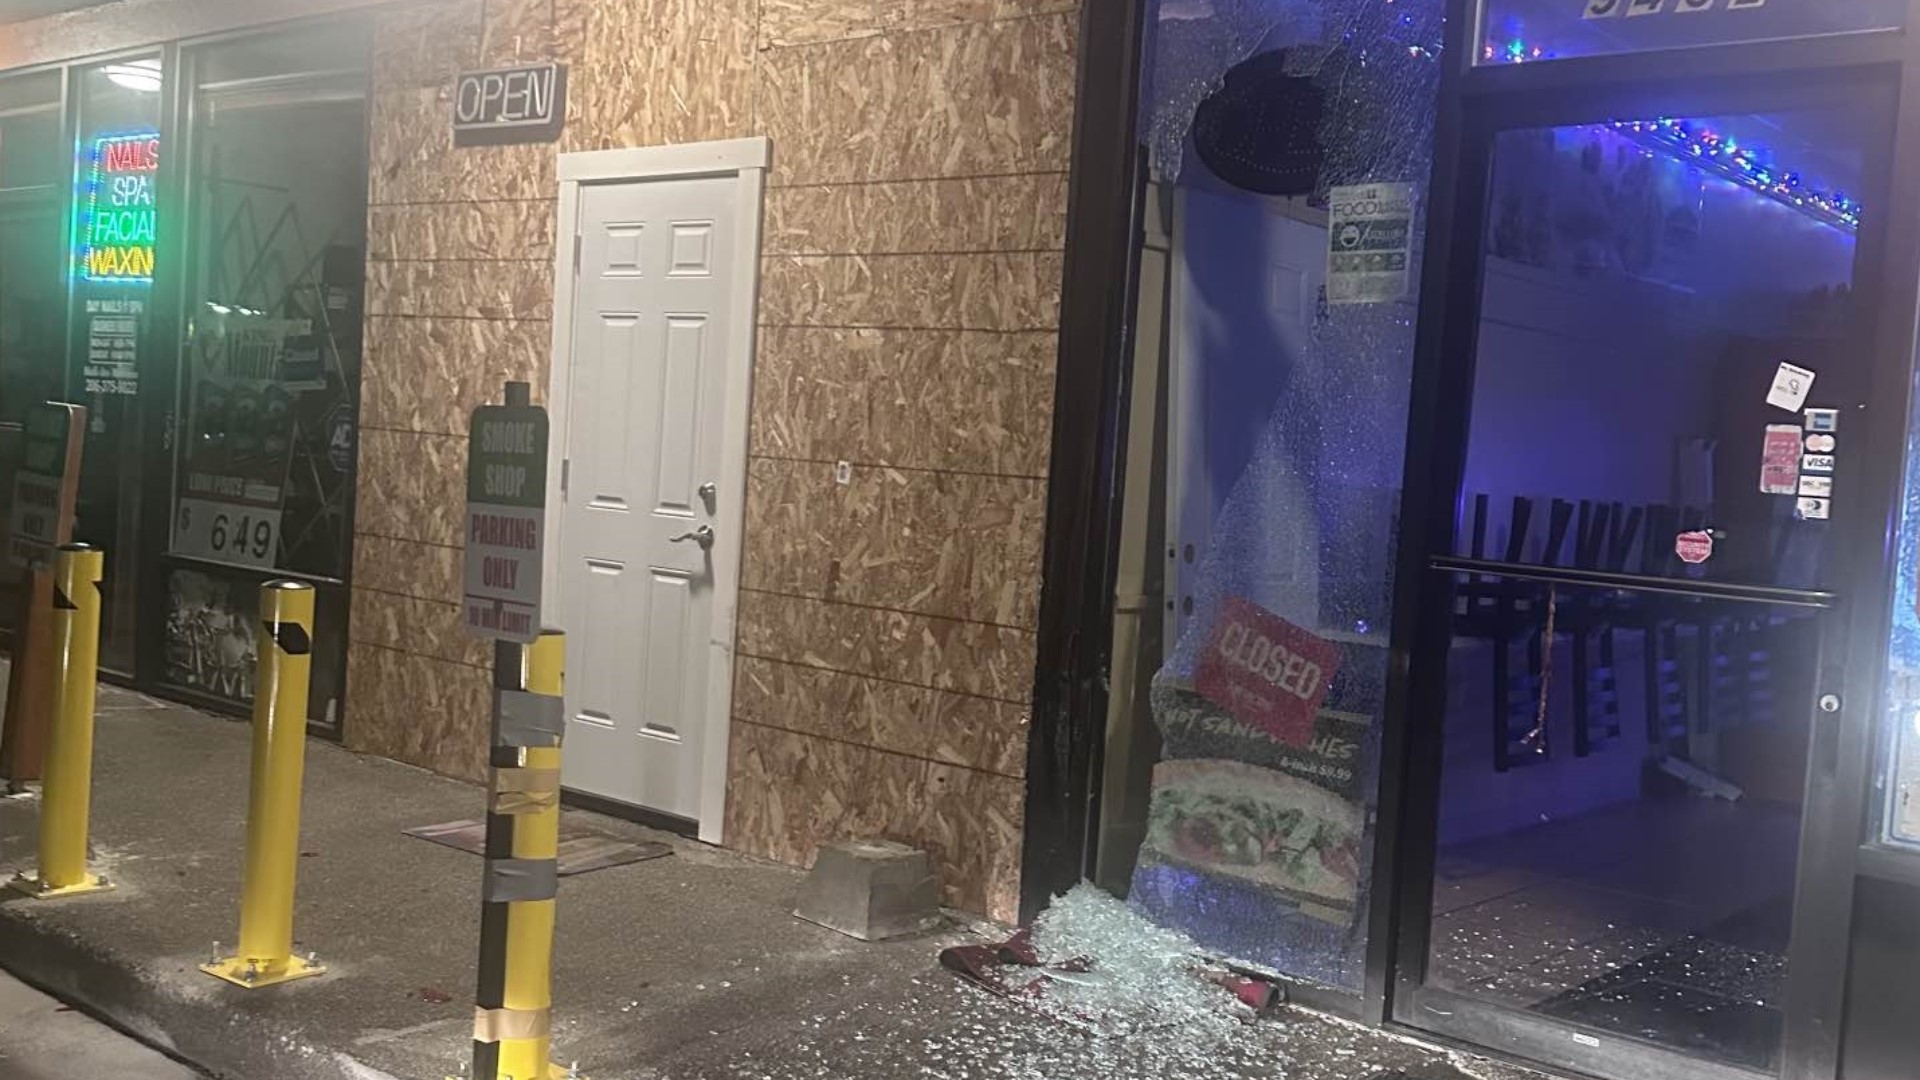 The smoke shop was hit with smash-and-grabs on Tuesday and Wednesday. The owner had poles installed in front of the store which prevented a third smash-and-grab.